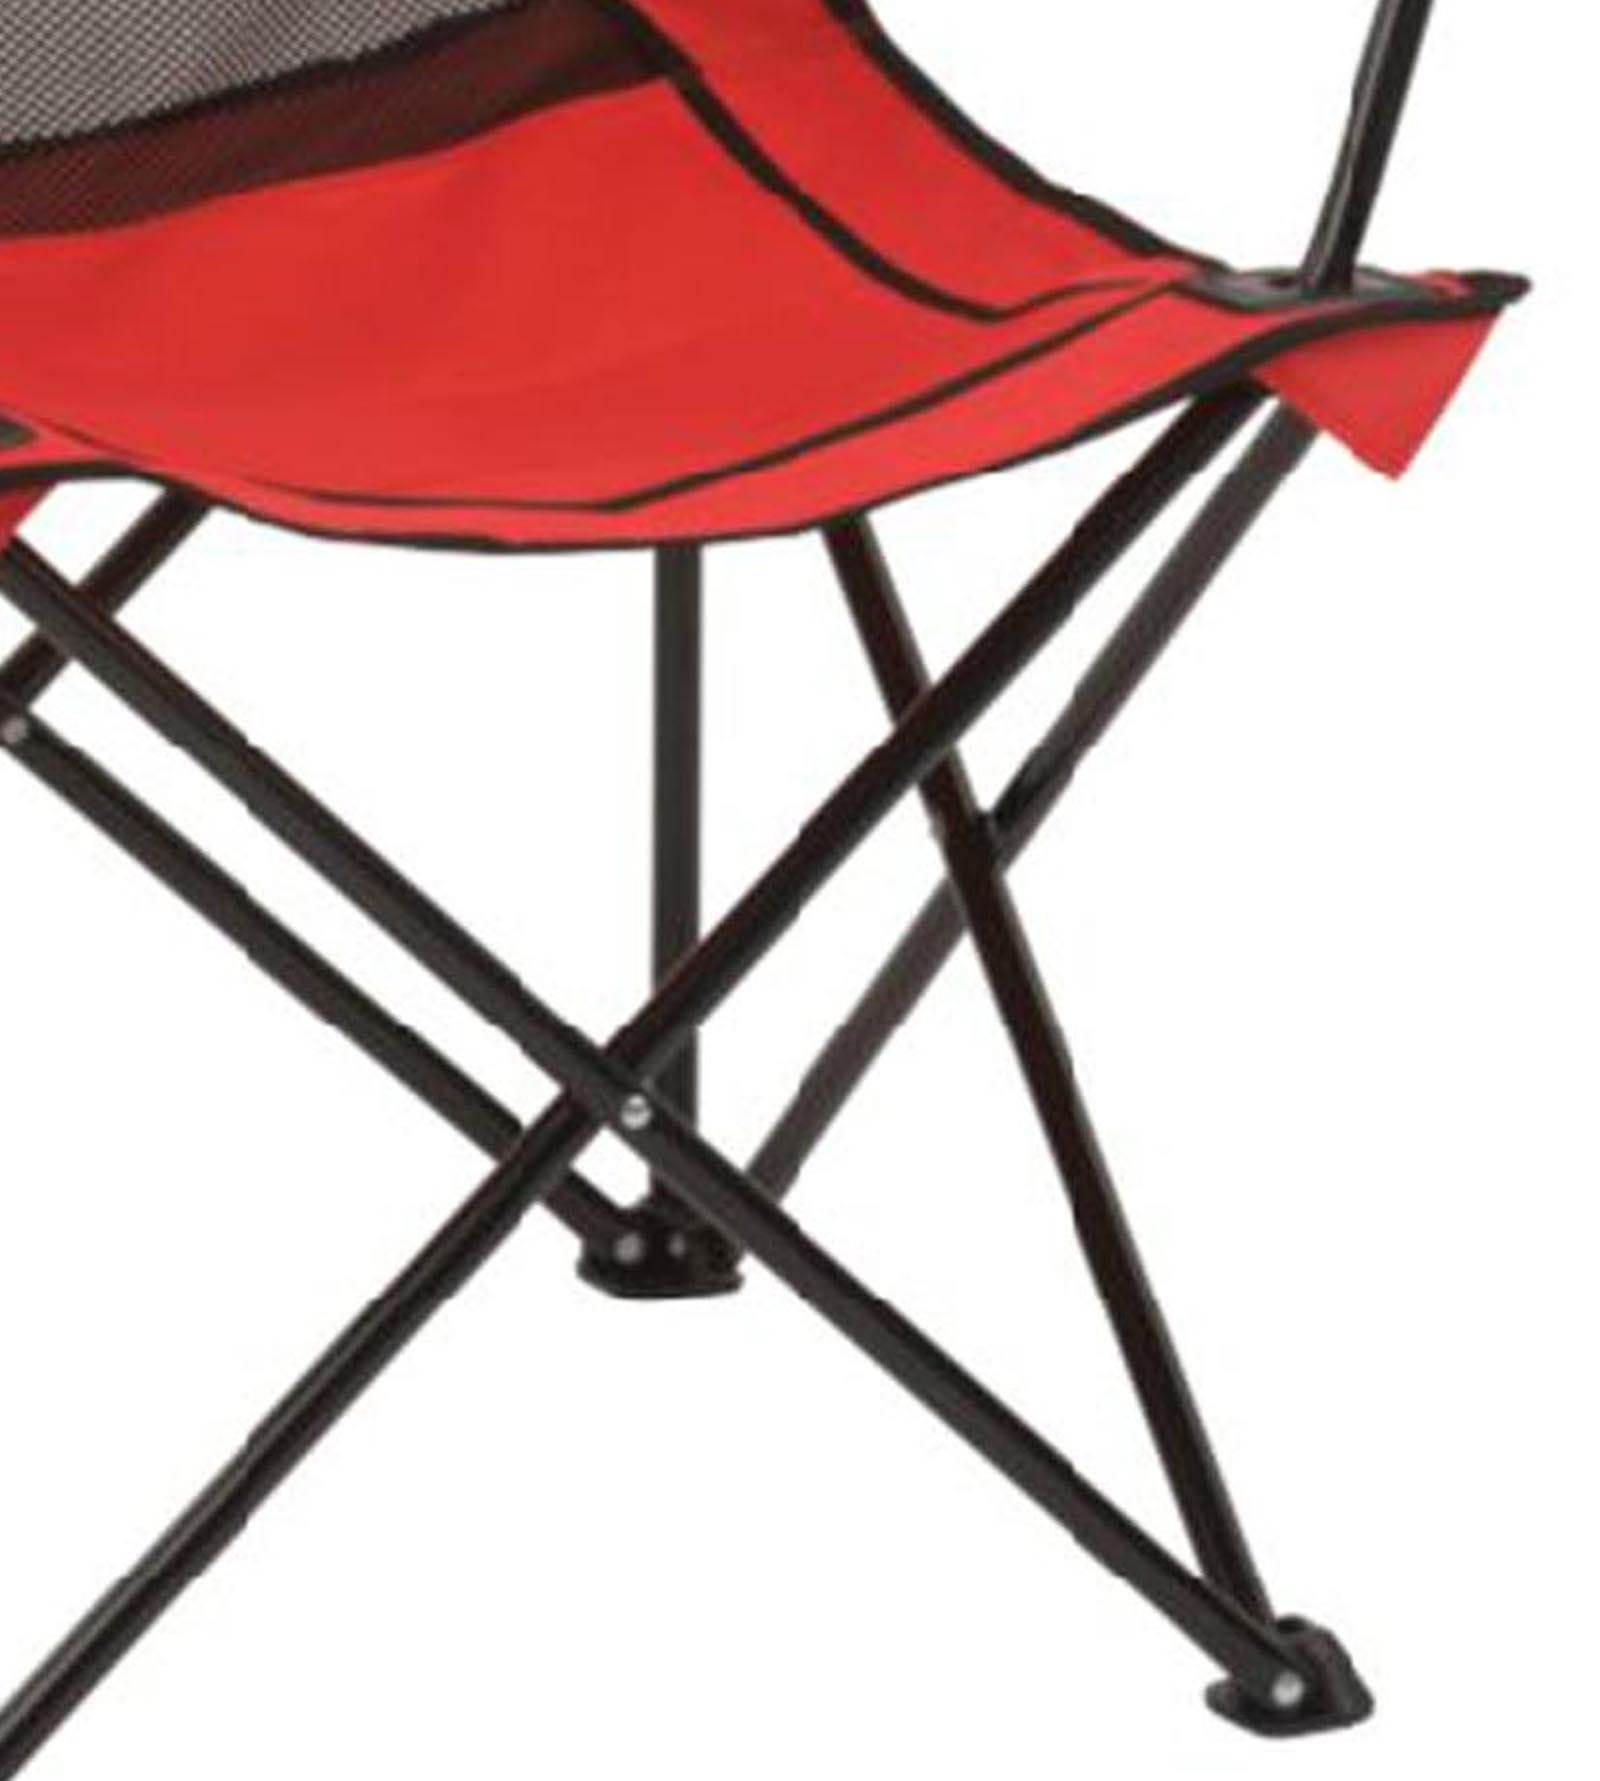 Coleman Broadband Mesh Quad Adult Camping Chair, Red - image 4 of 5